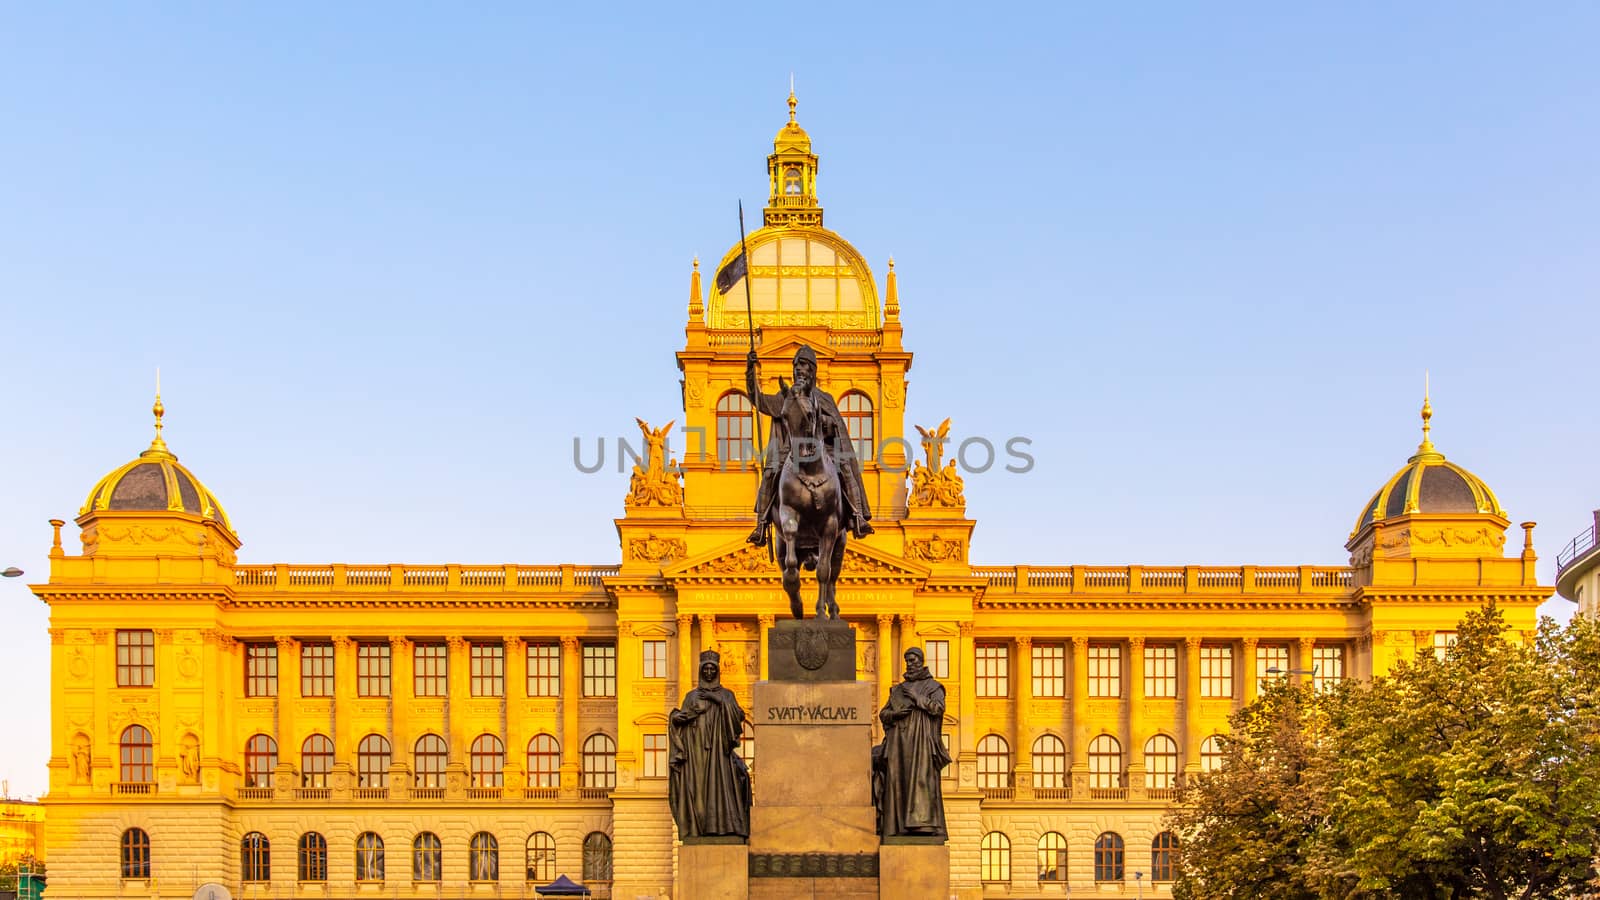 The bronze equestrian statue of St Wenceslas at the Wenceslas Square with historical Neorenaissance building of National Museum in Prague, Czech Republic by pyty